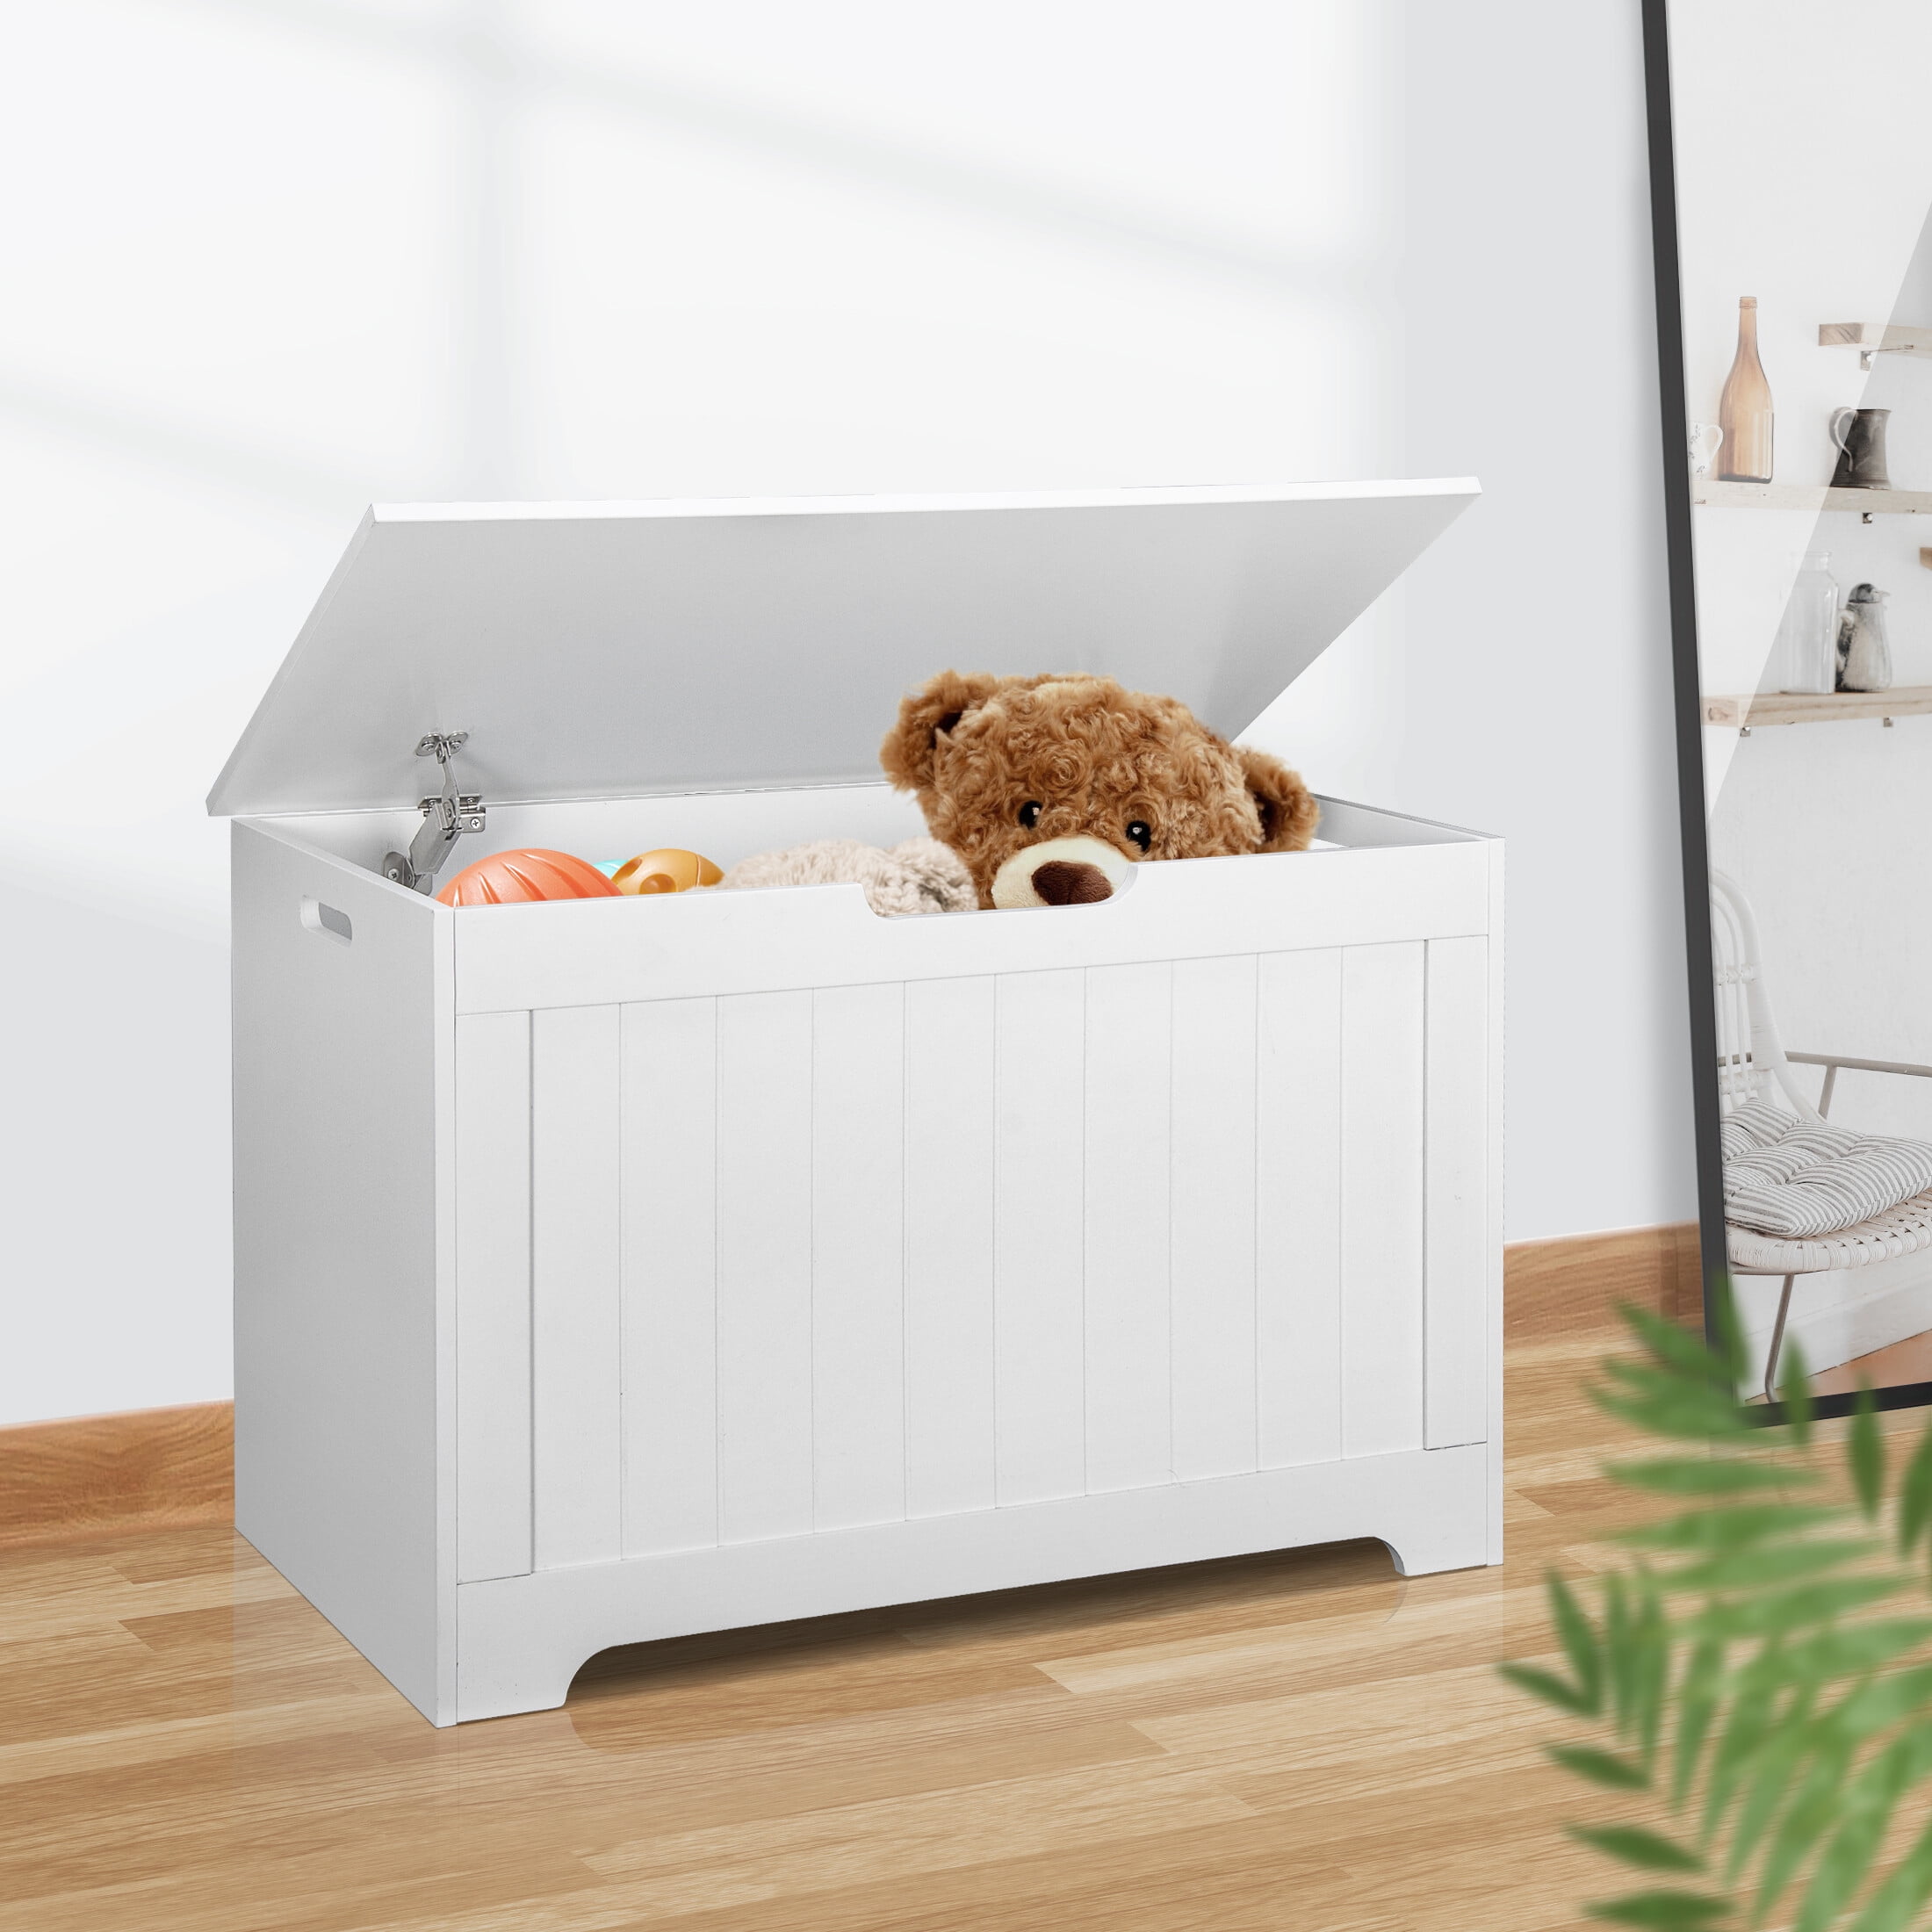 Toy Chest & Storage Trunk with Safety Hinge Simple White Storage Chest 30’’ Wooden Storage Chest Bench WillBee Toy Box for Kids Boys,Girls